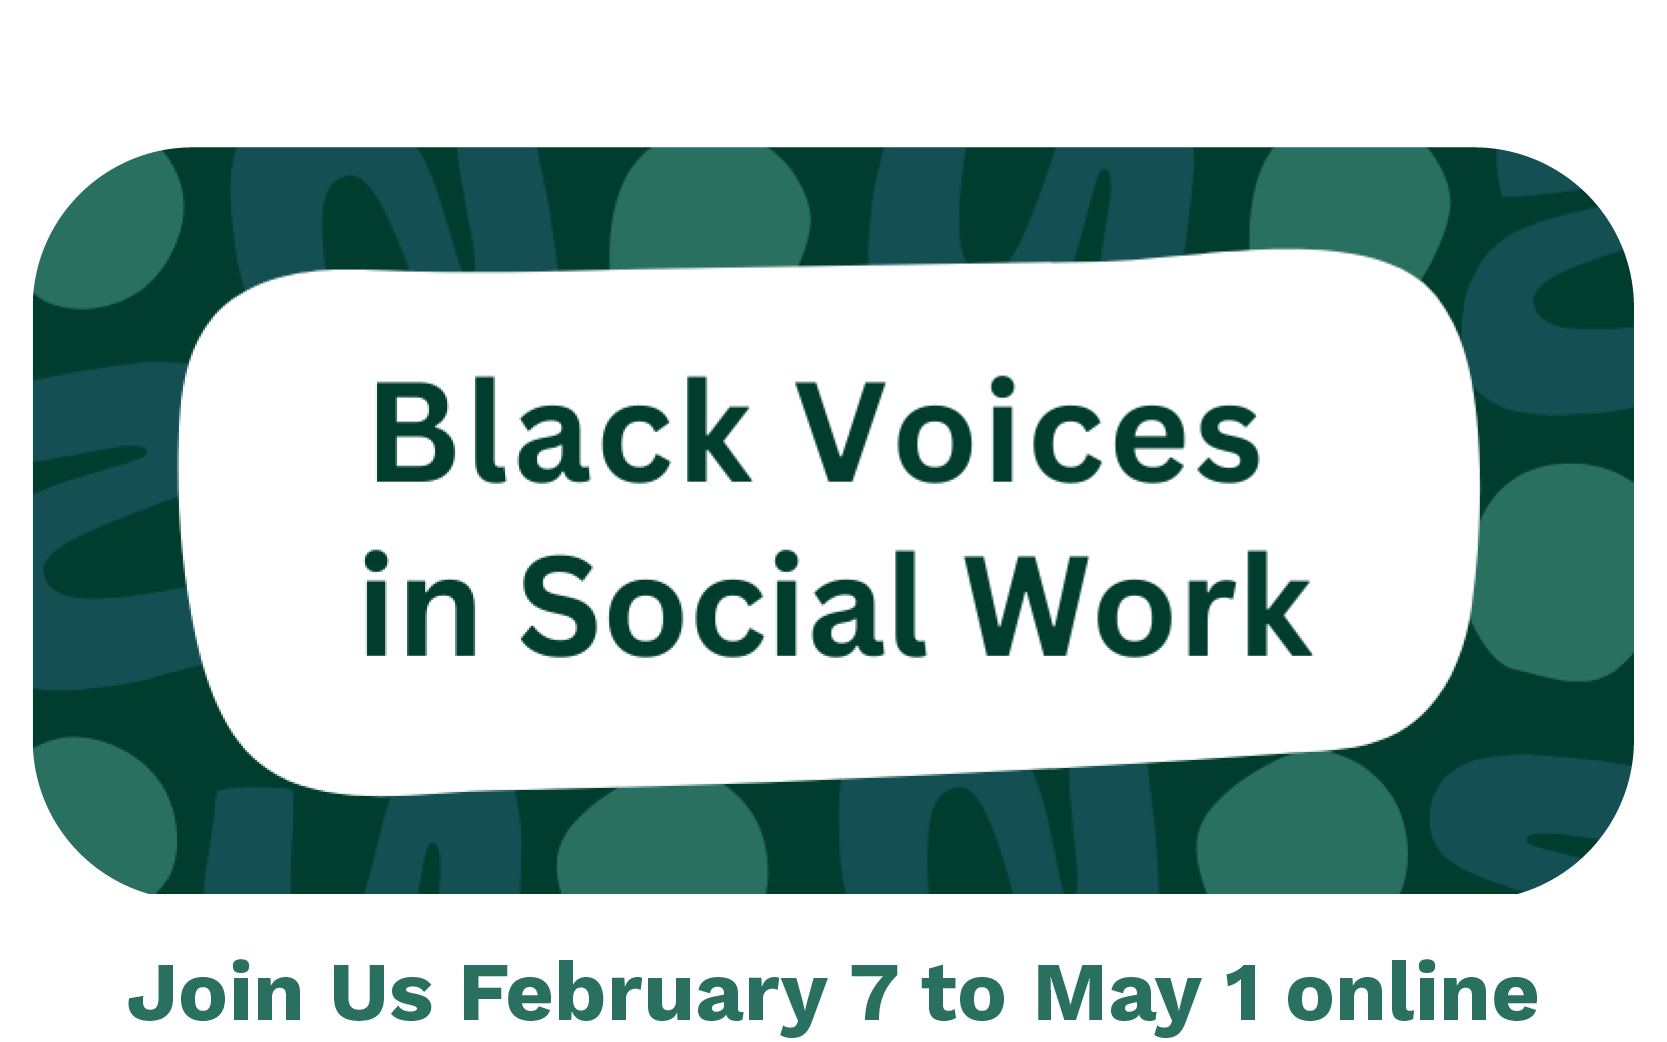 Black Voices in Social Work: Join us February 7 to May 1 online